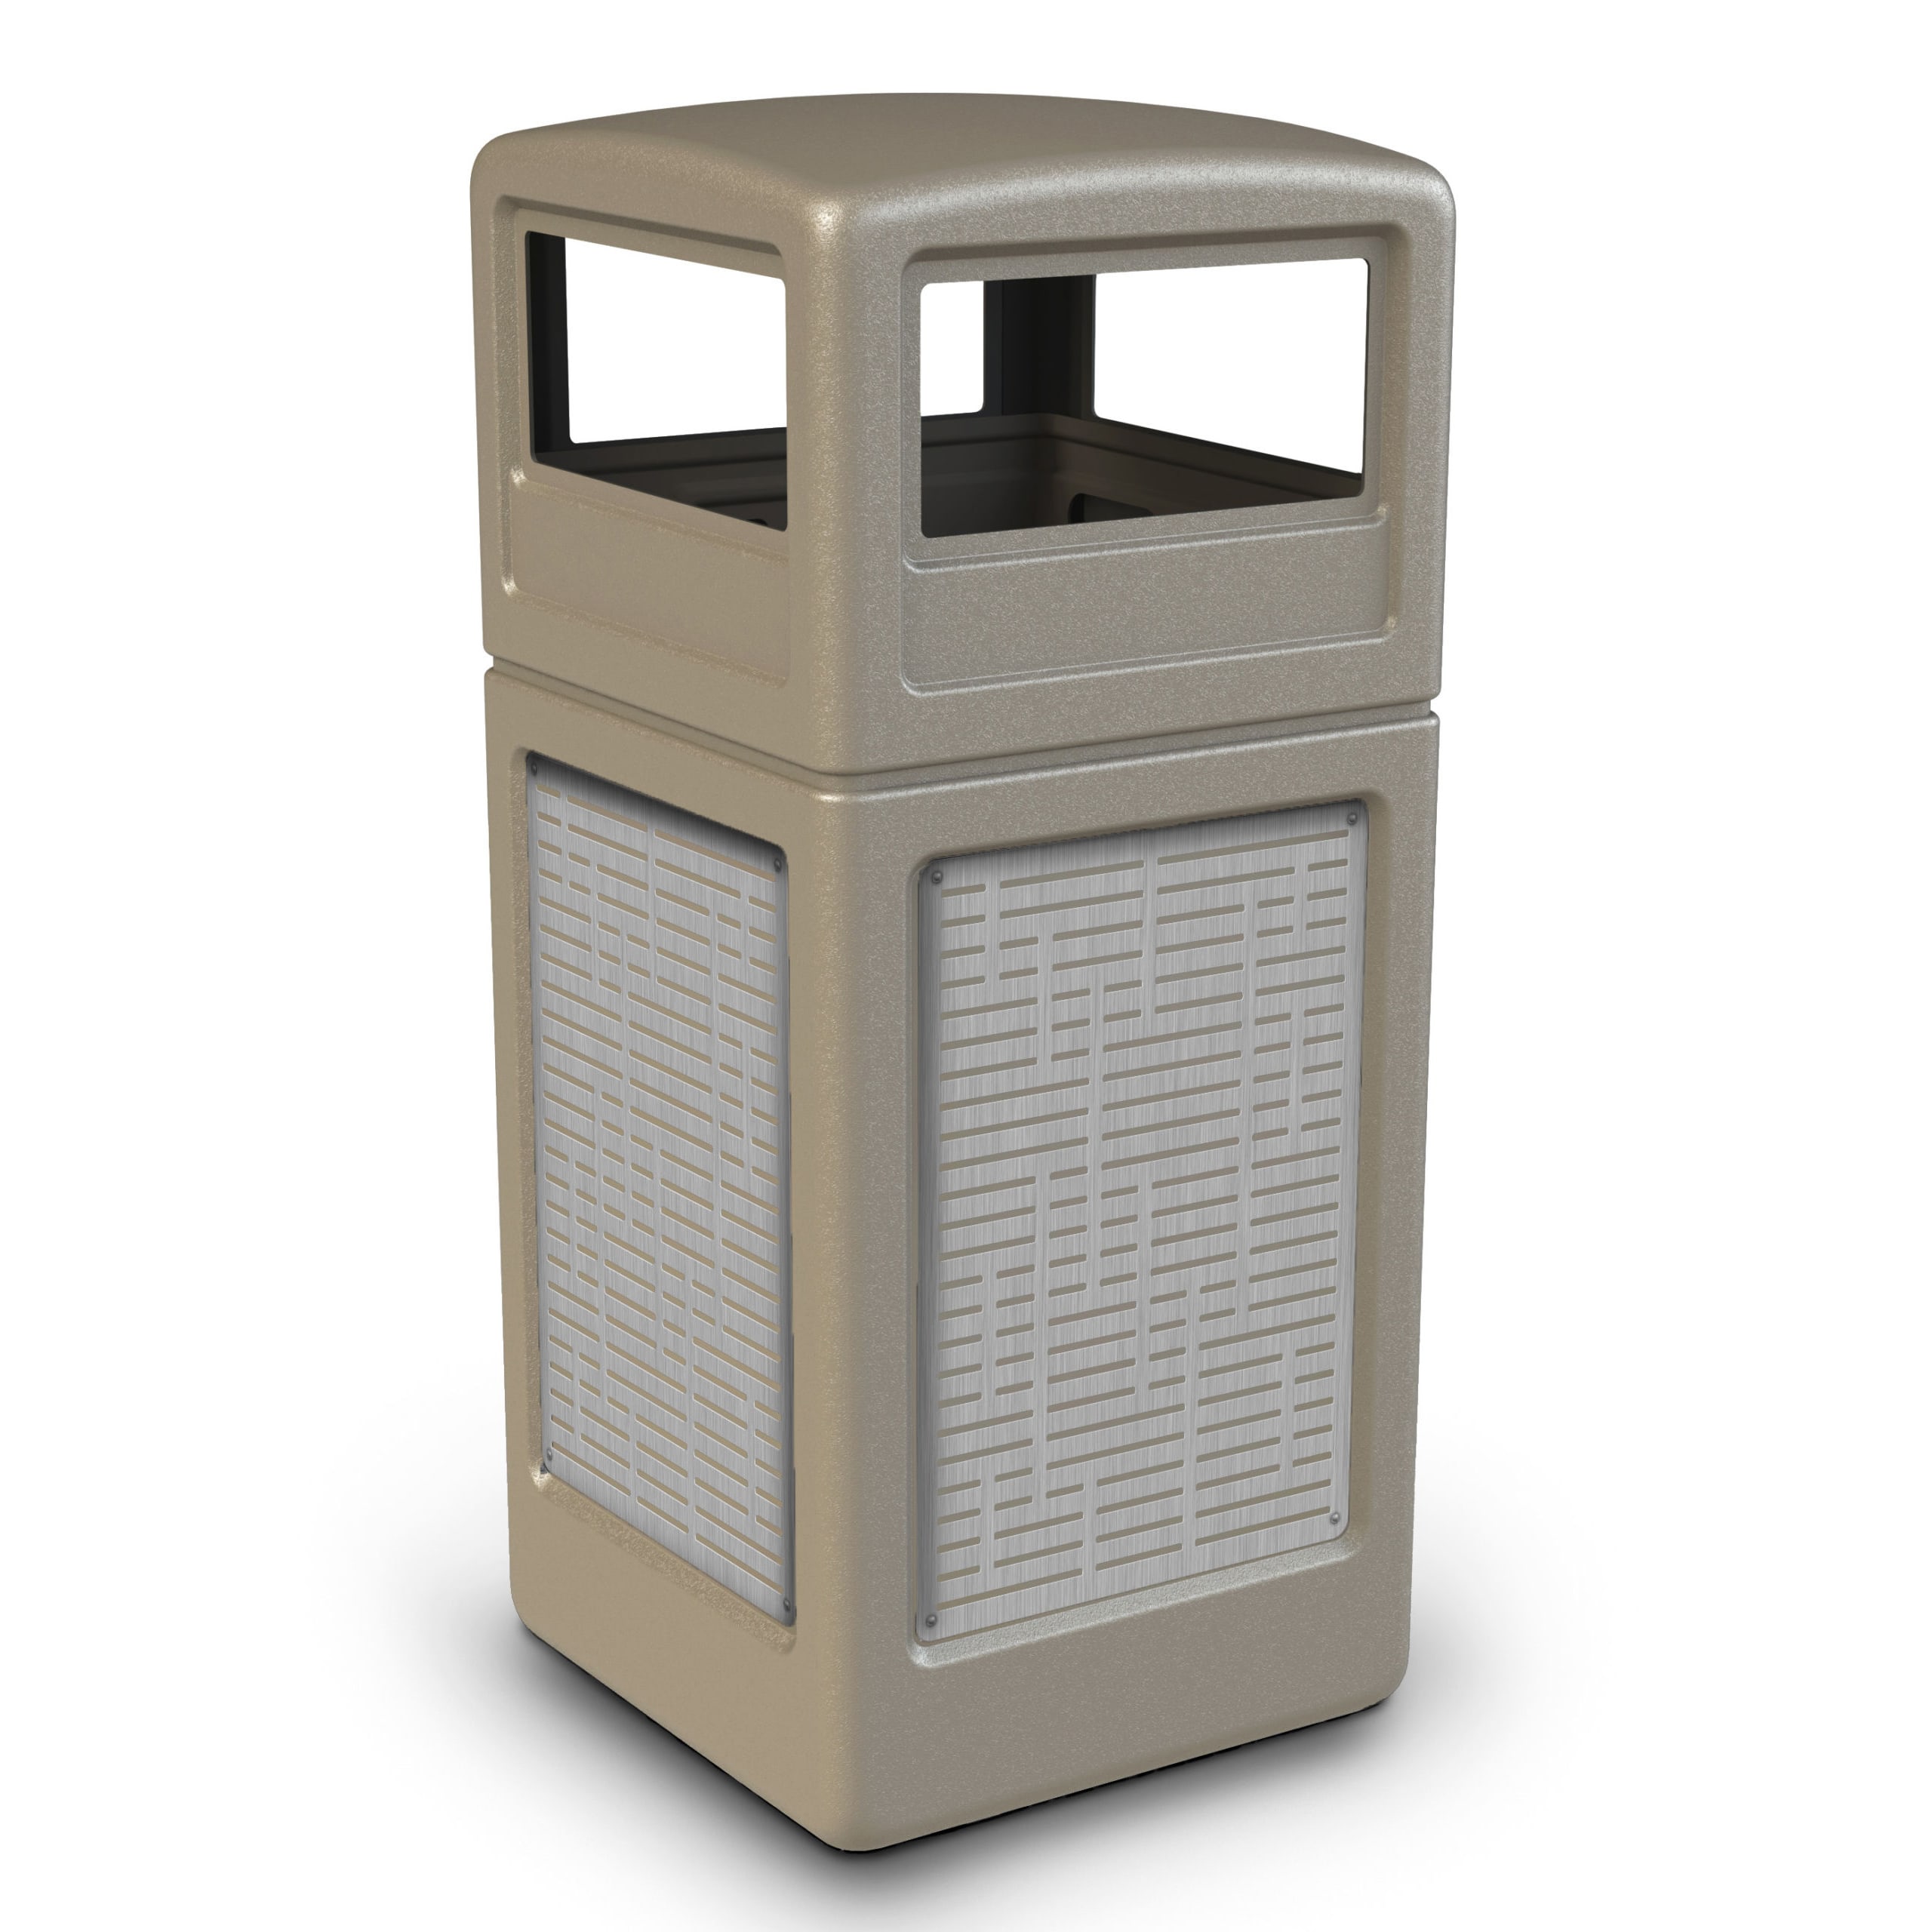 42 Gal. Liner 734401 for Commercial Zone Square Trash Cans